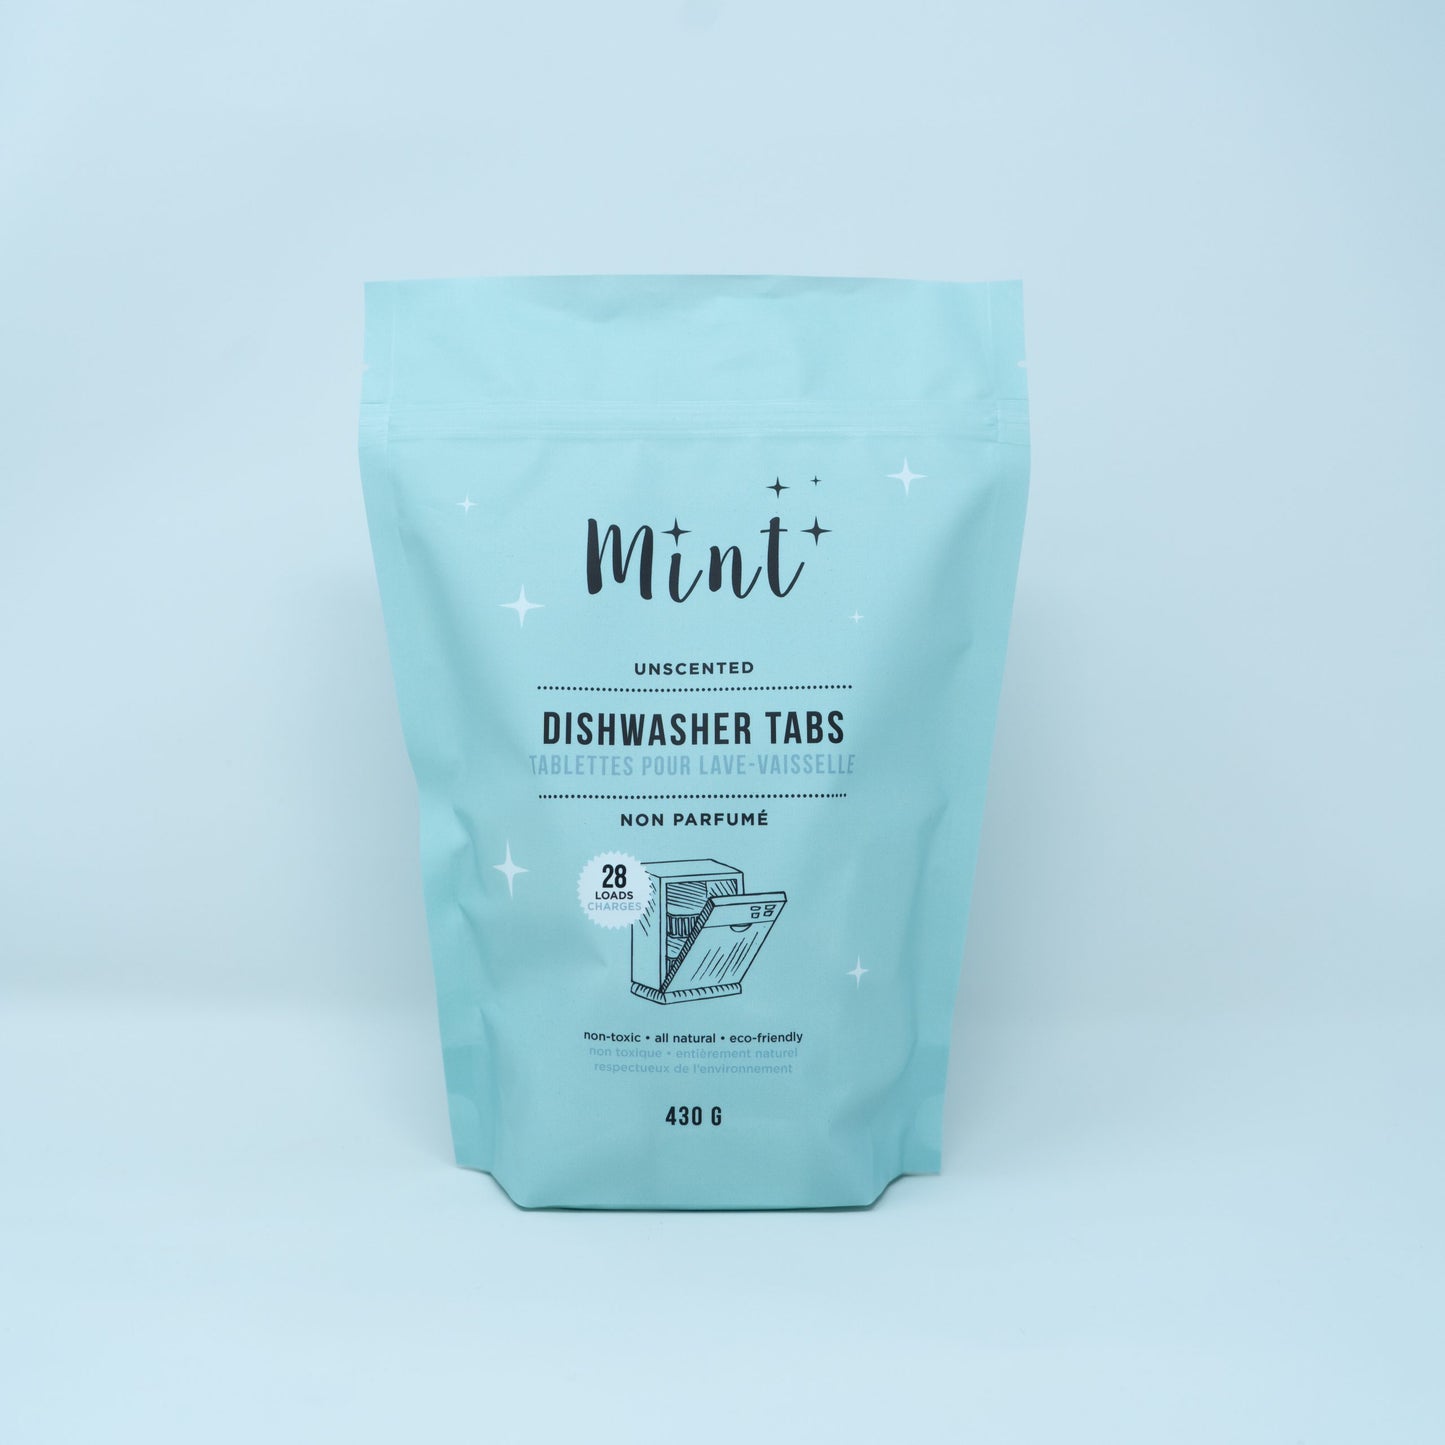 Dishwasher Tabs by Mint Cleaning